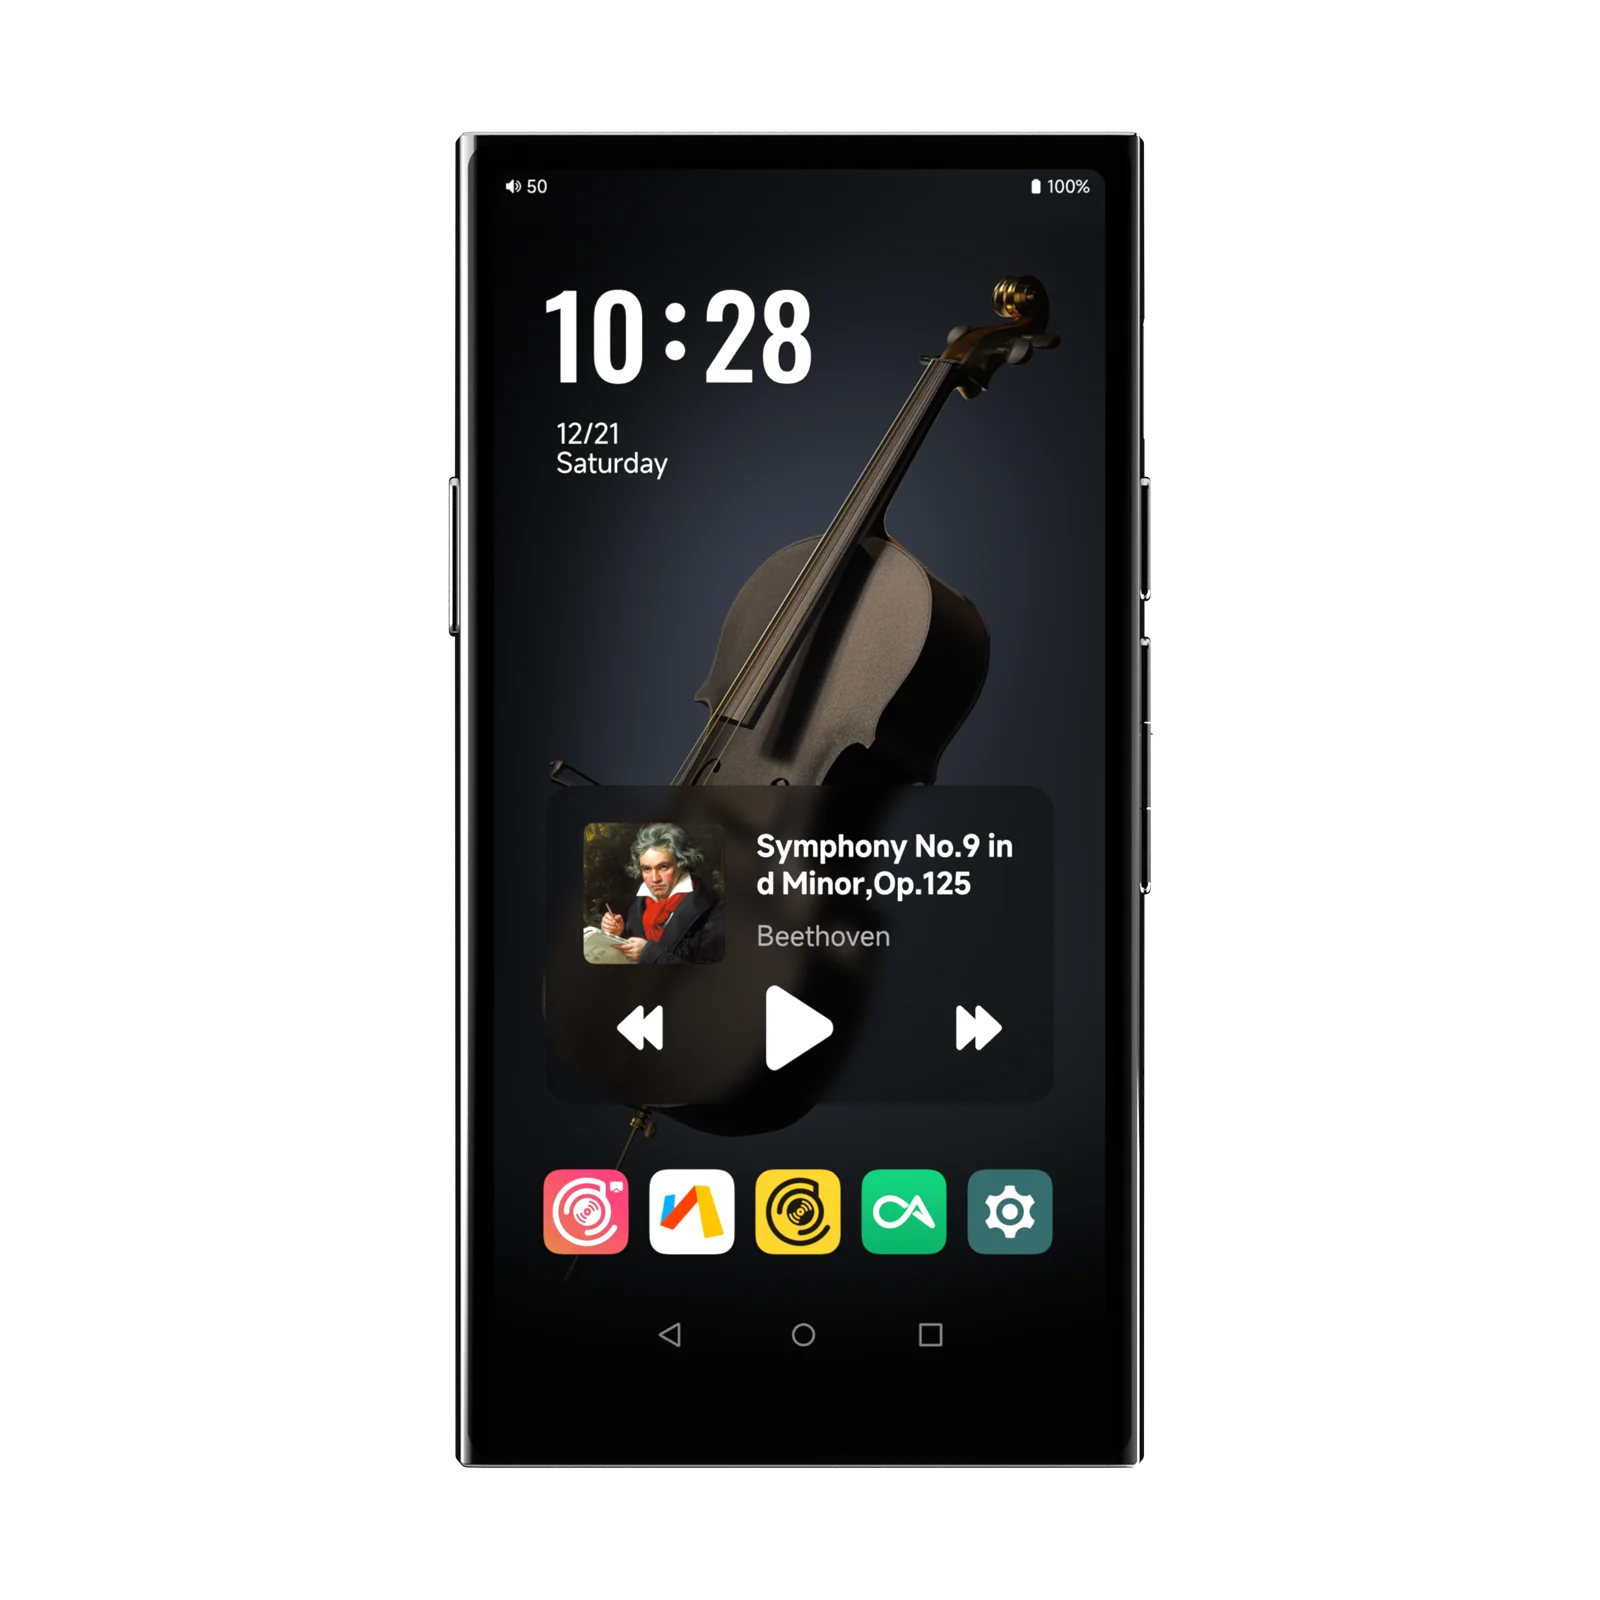 HiBy R8 II Hi-End Android Digital Audio Player